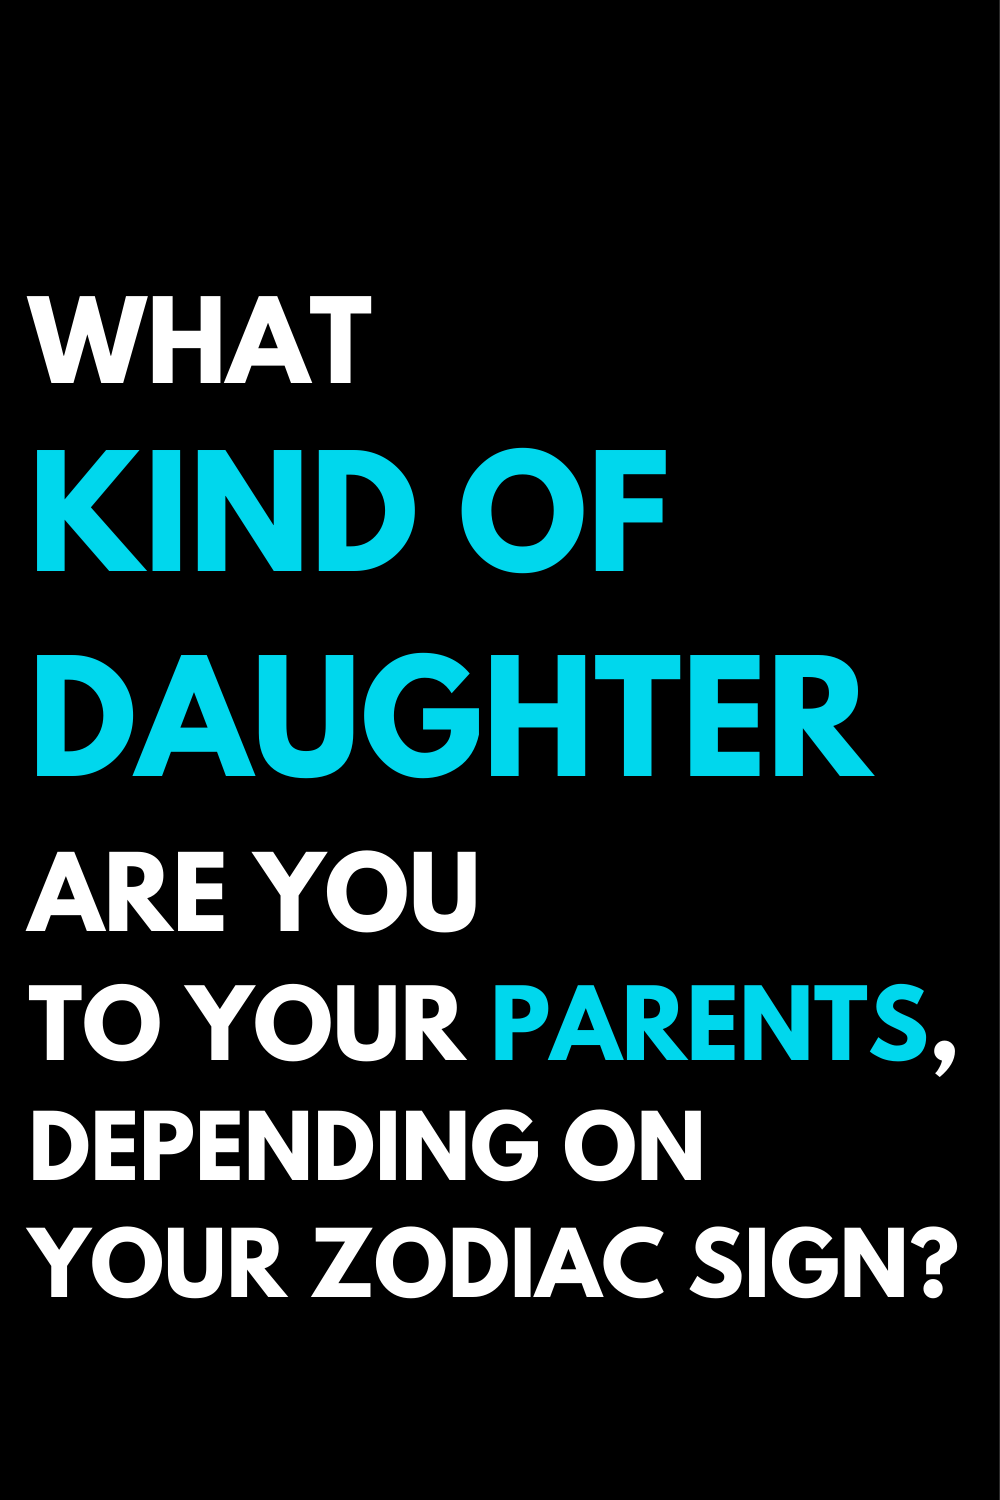 What kind of daughter are you to your parents, depending on your zodiac sign?